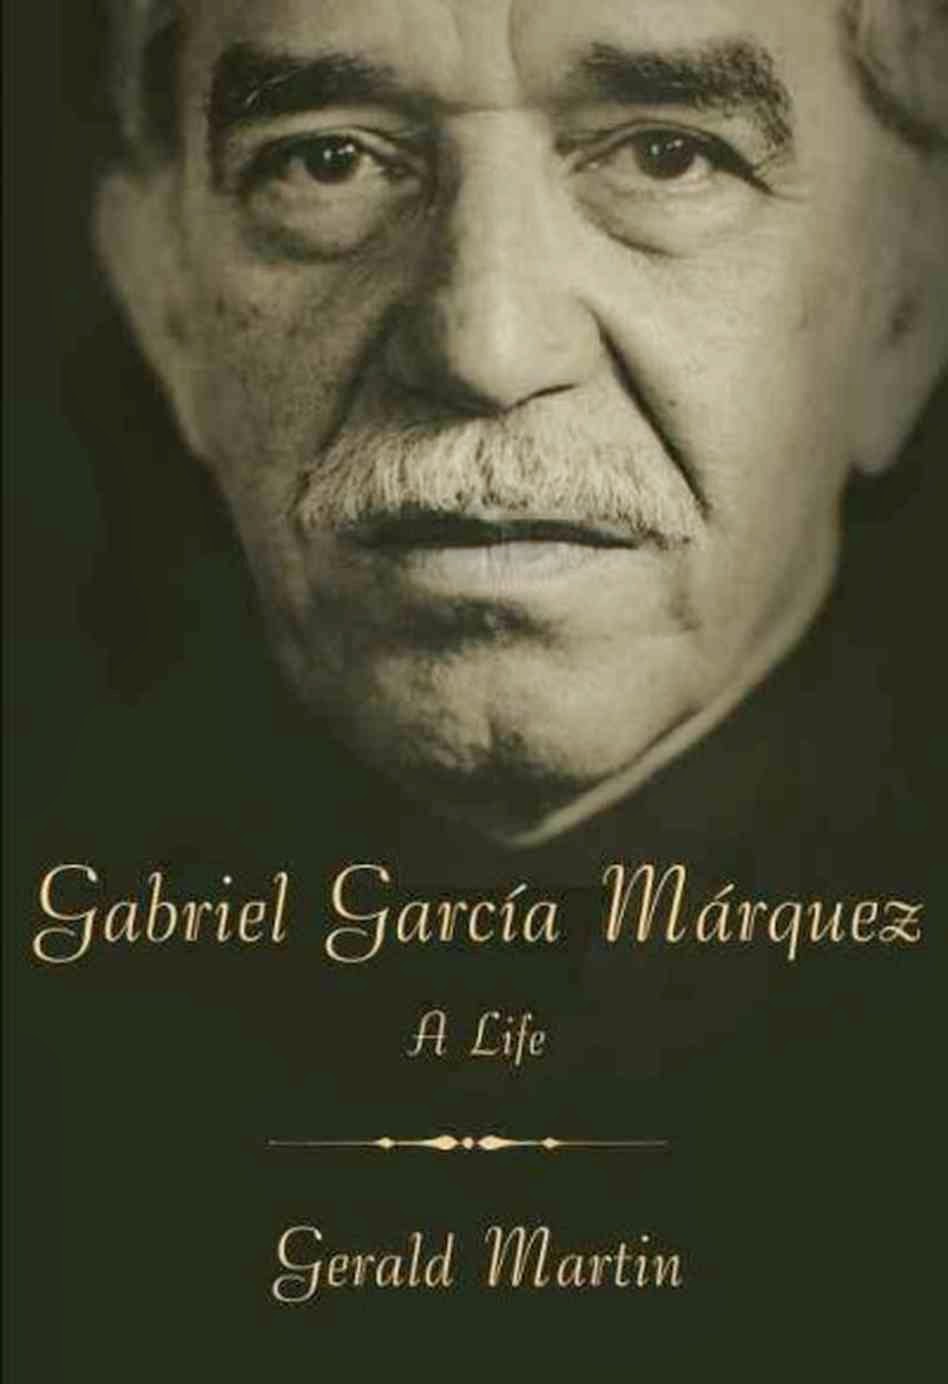 Discovering Ice in the Desert Gabriel Garcia Marquez and My Year of Solitude in Iraq